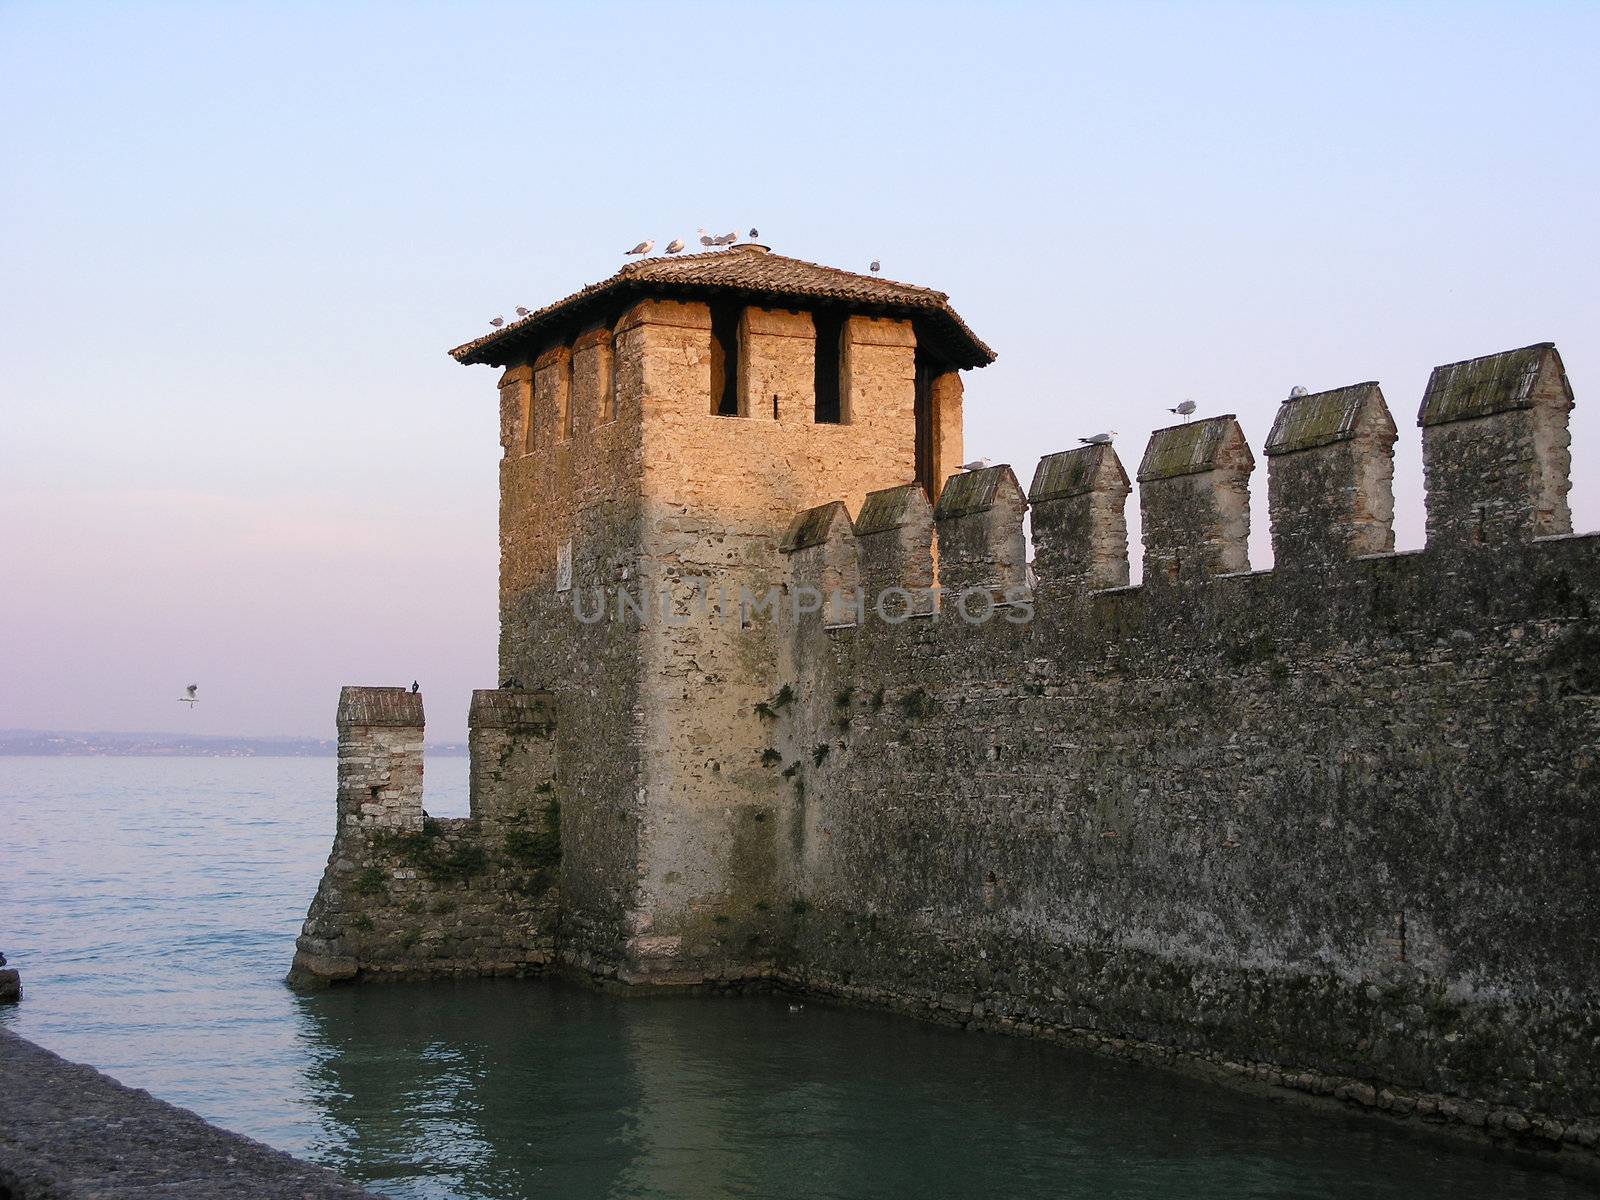 Scaligero Castle, Sirmione, Italy by pljvv